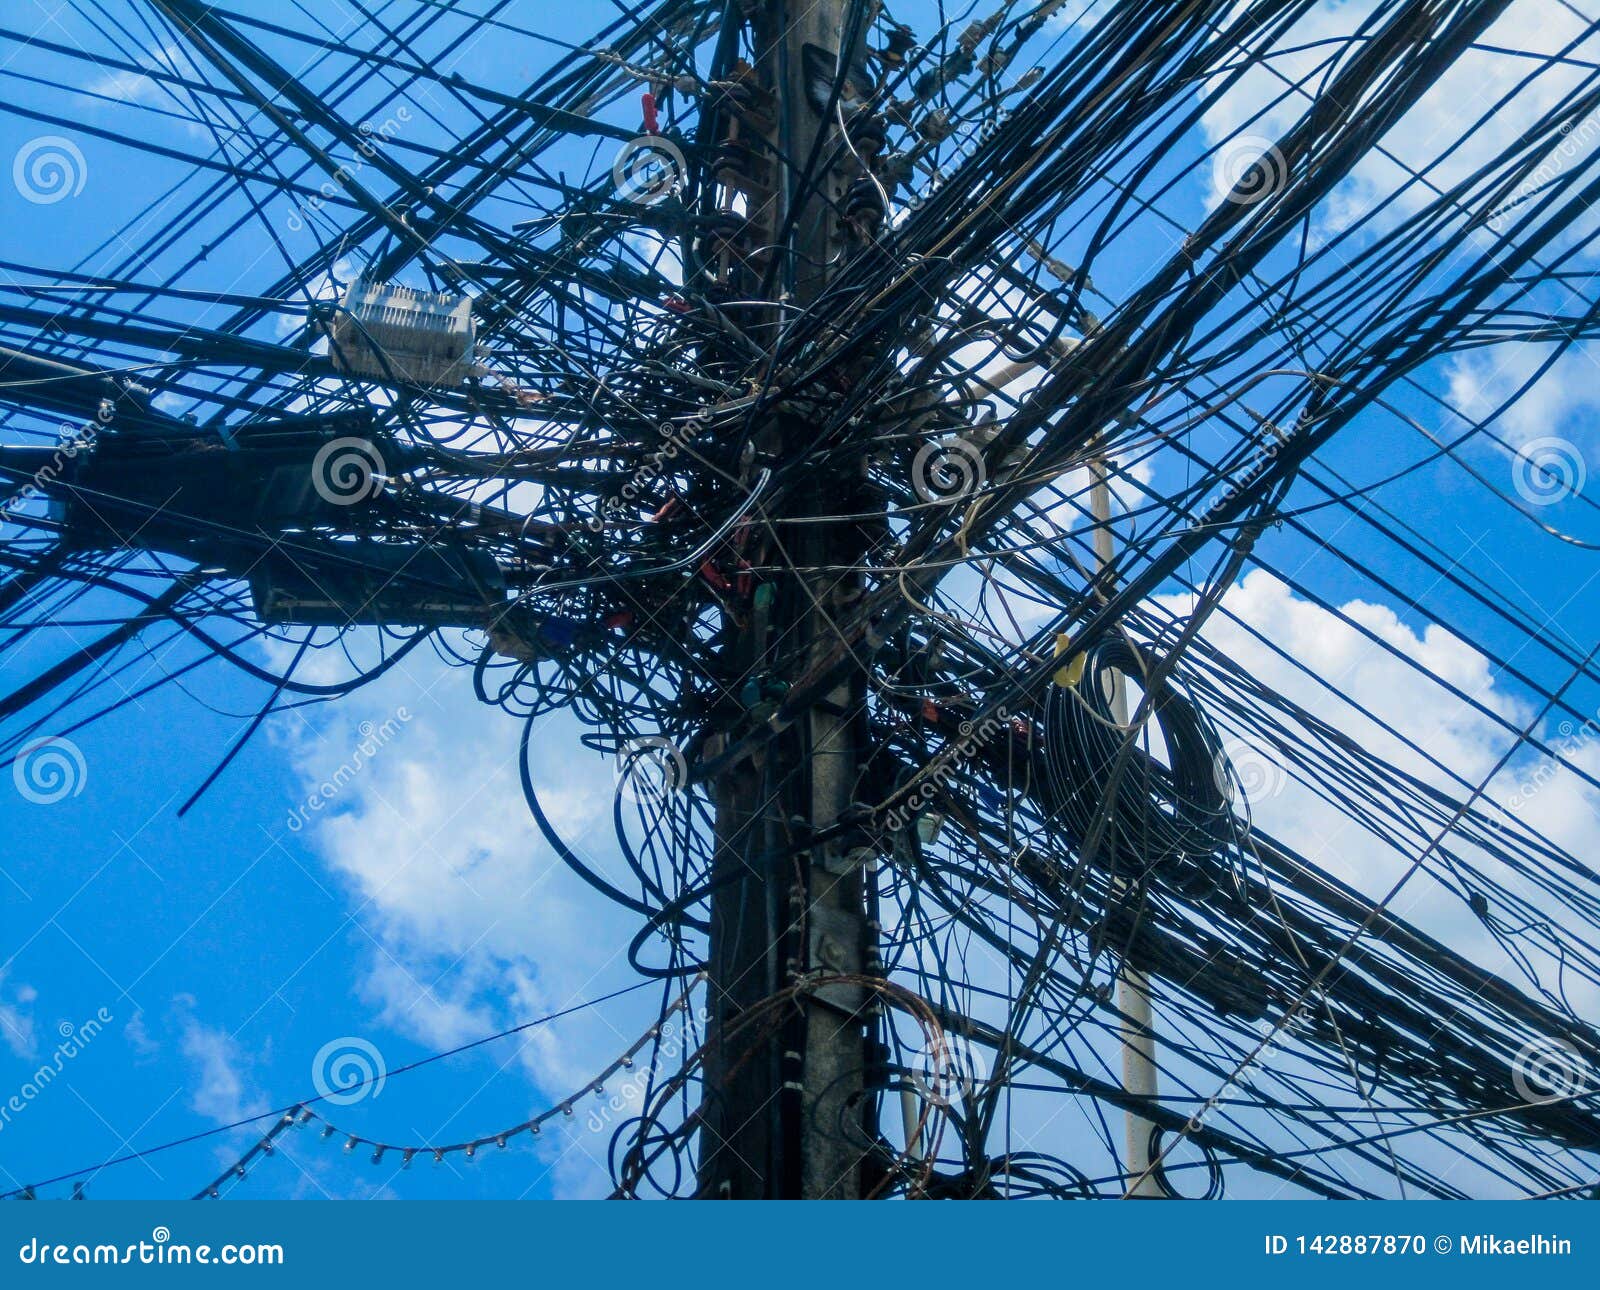 chaos-cables-wires-electric-pole-thailan